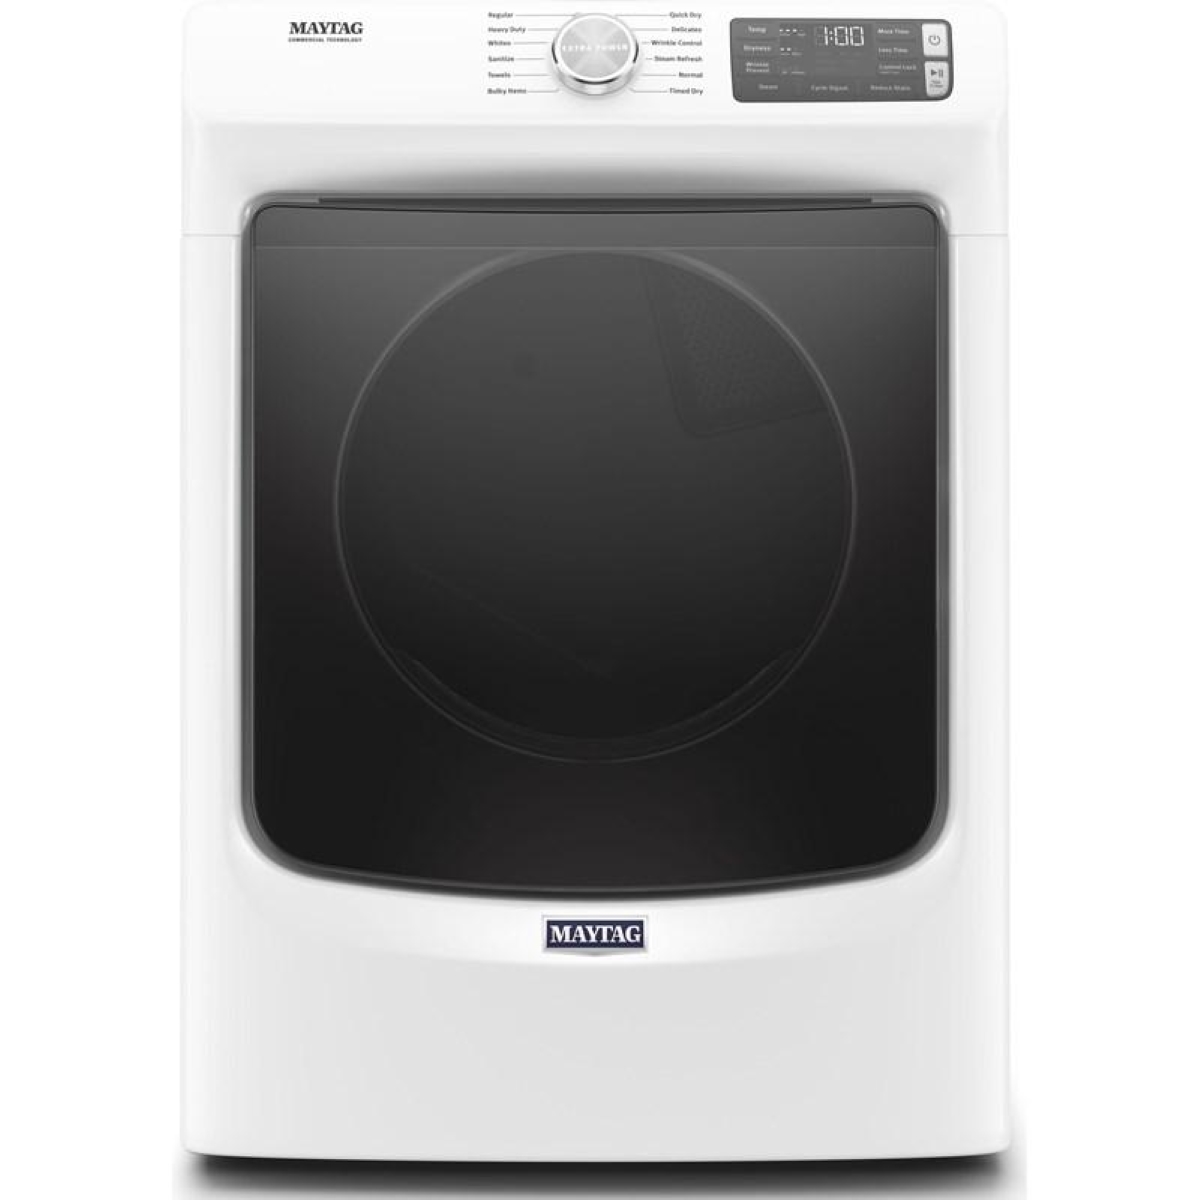 How To Fix The Error Code F75 For Maytag Dryer